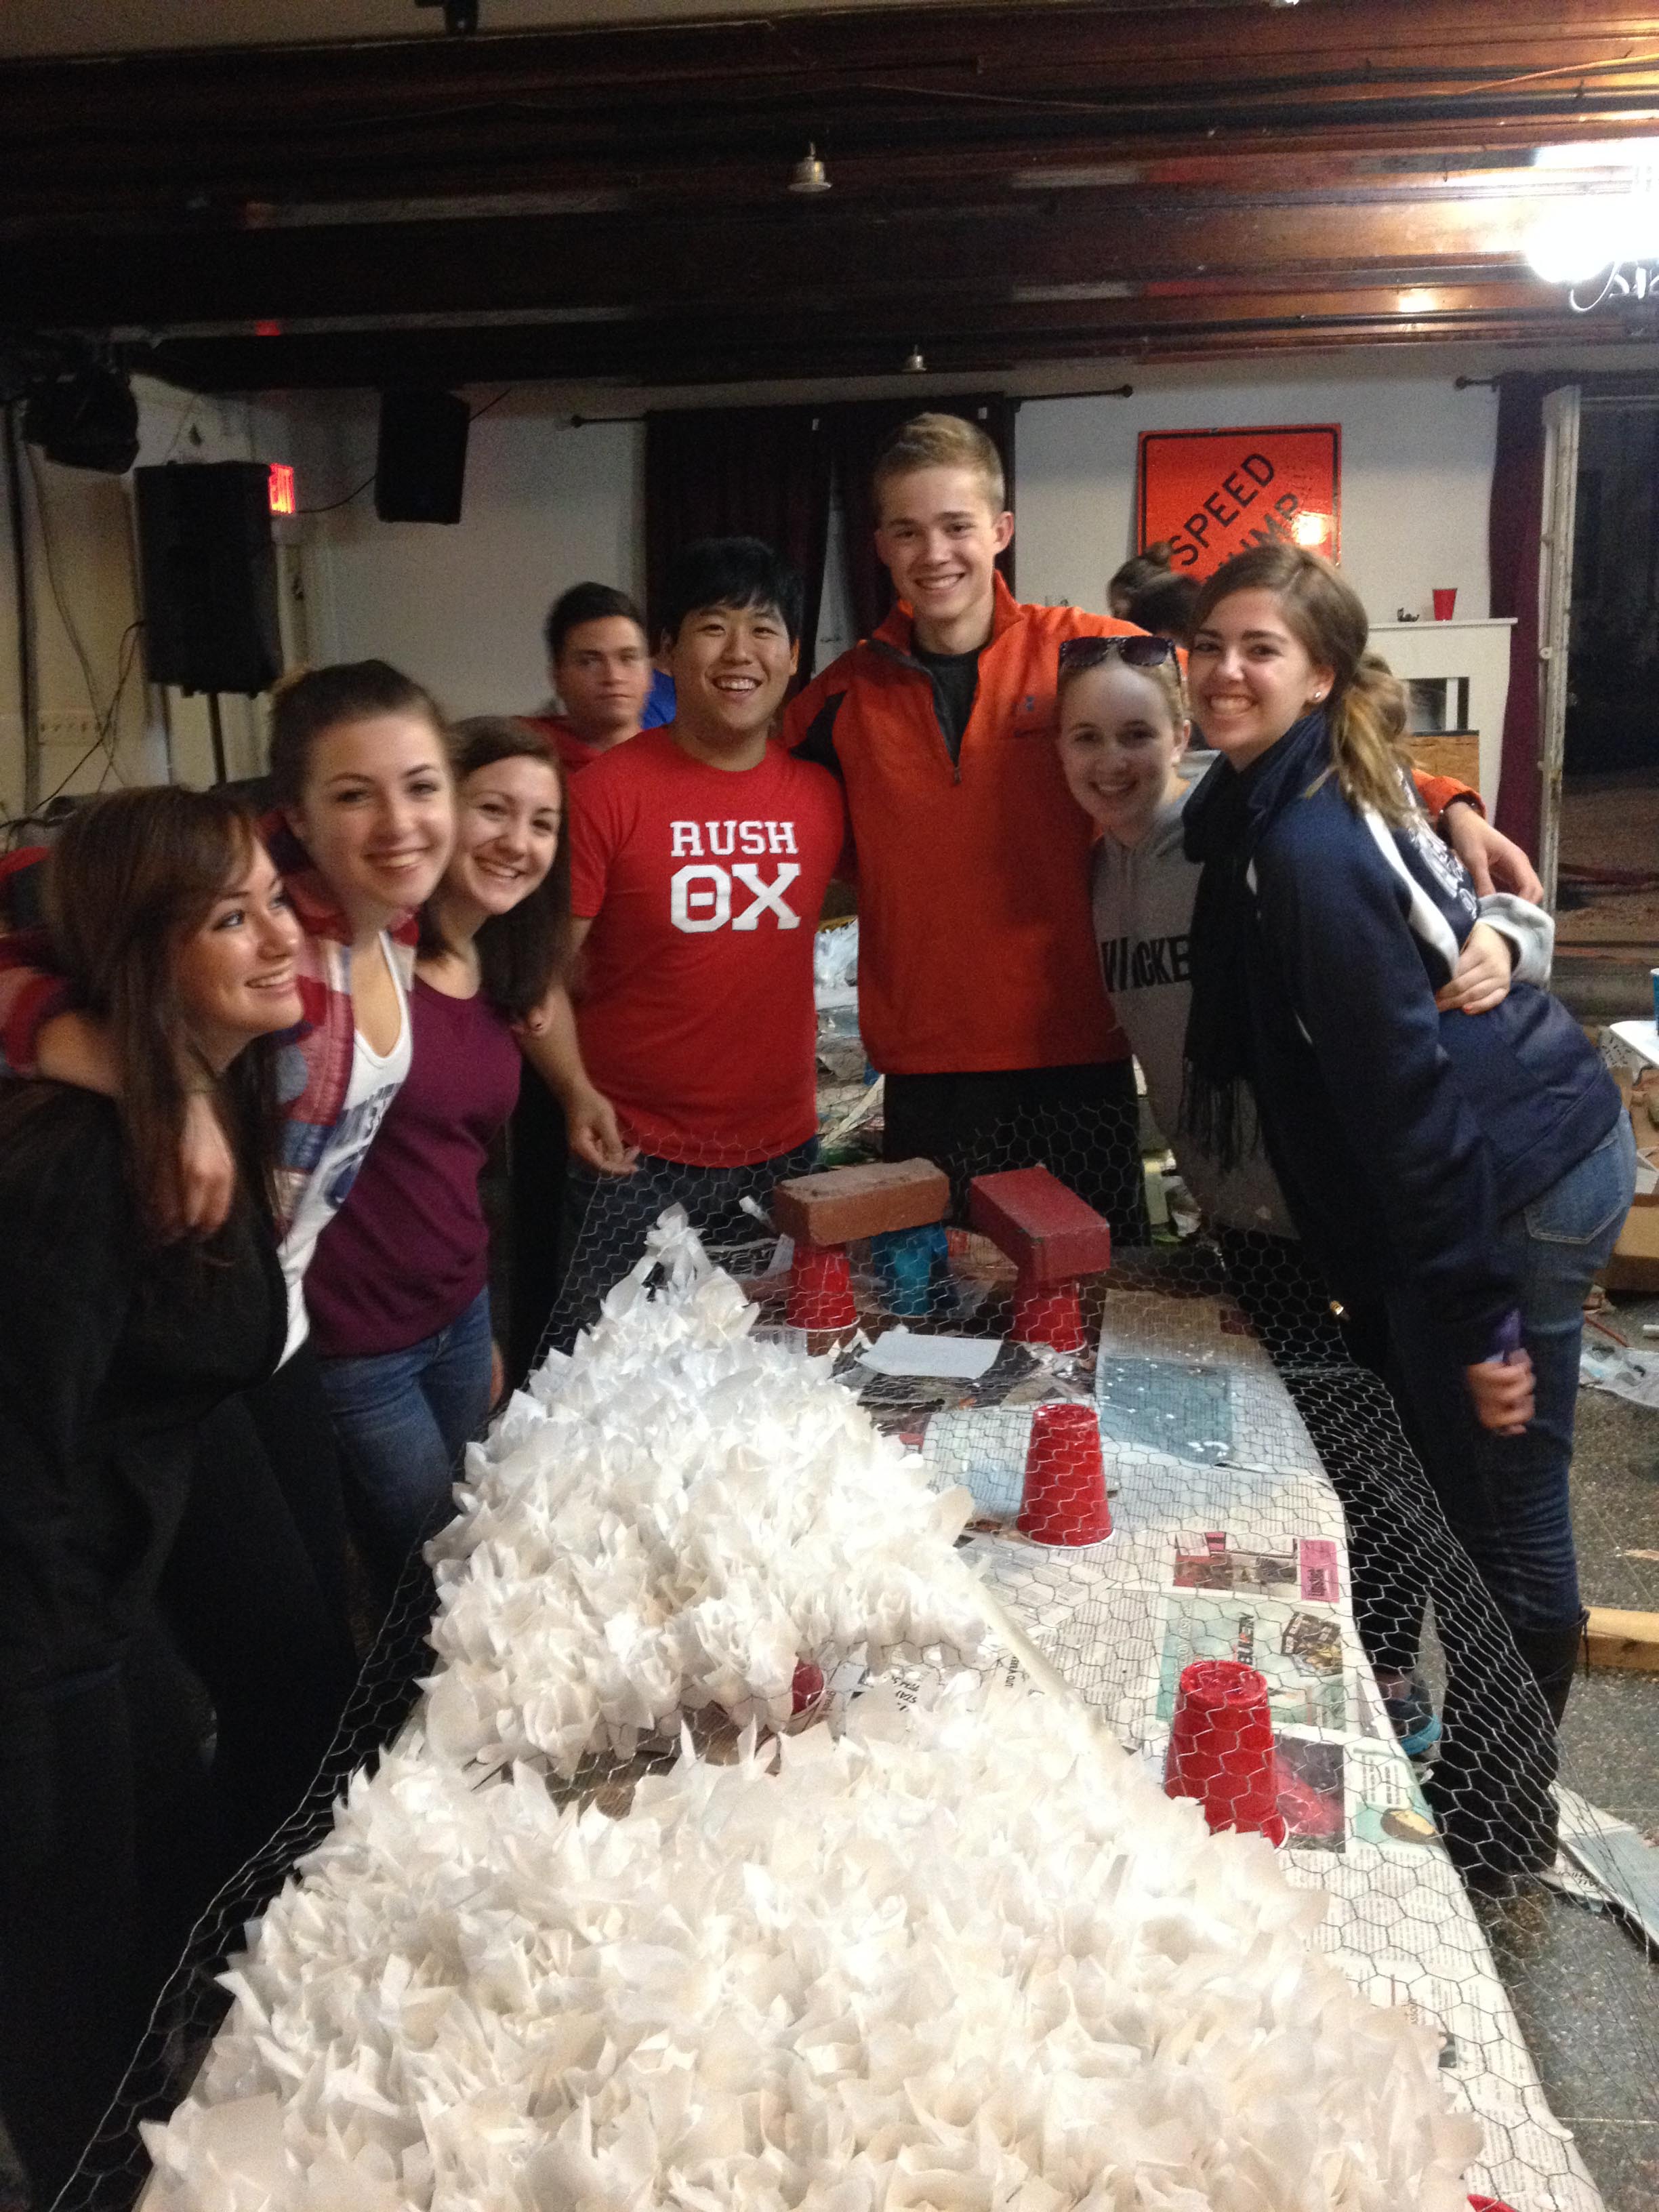  Homecoming 2013 preparations begin with float building - Danny Lim and TK - Oct. 8, 2013 